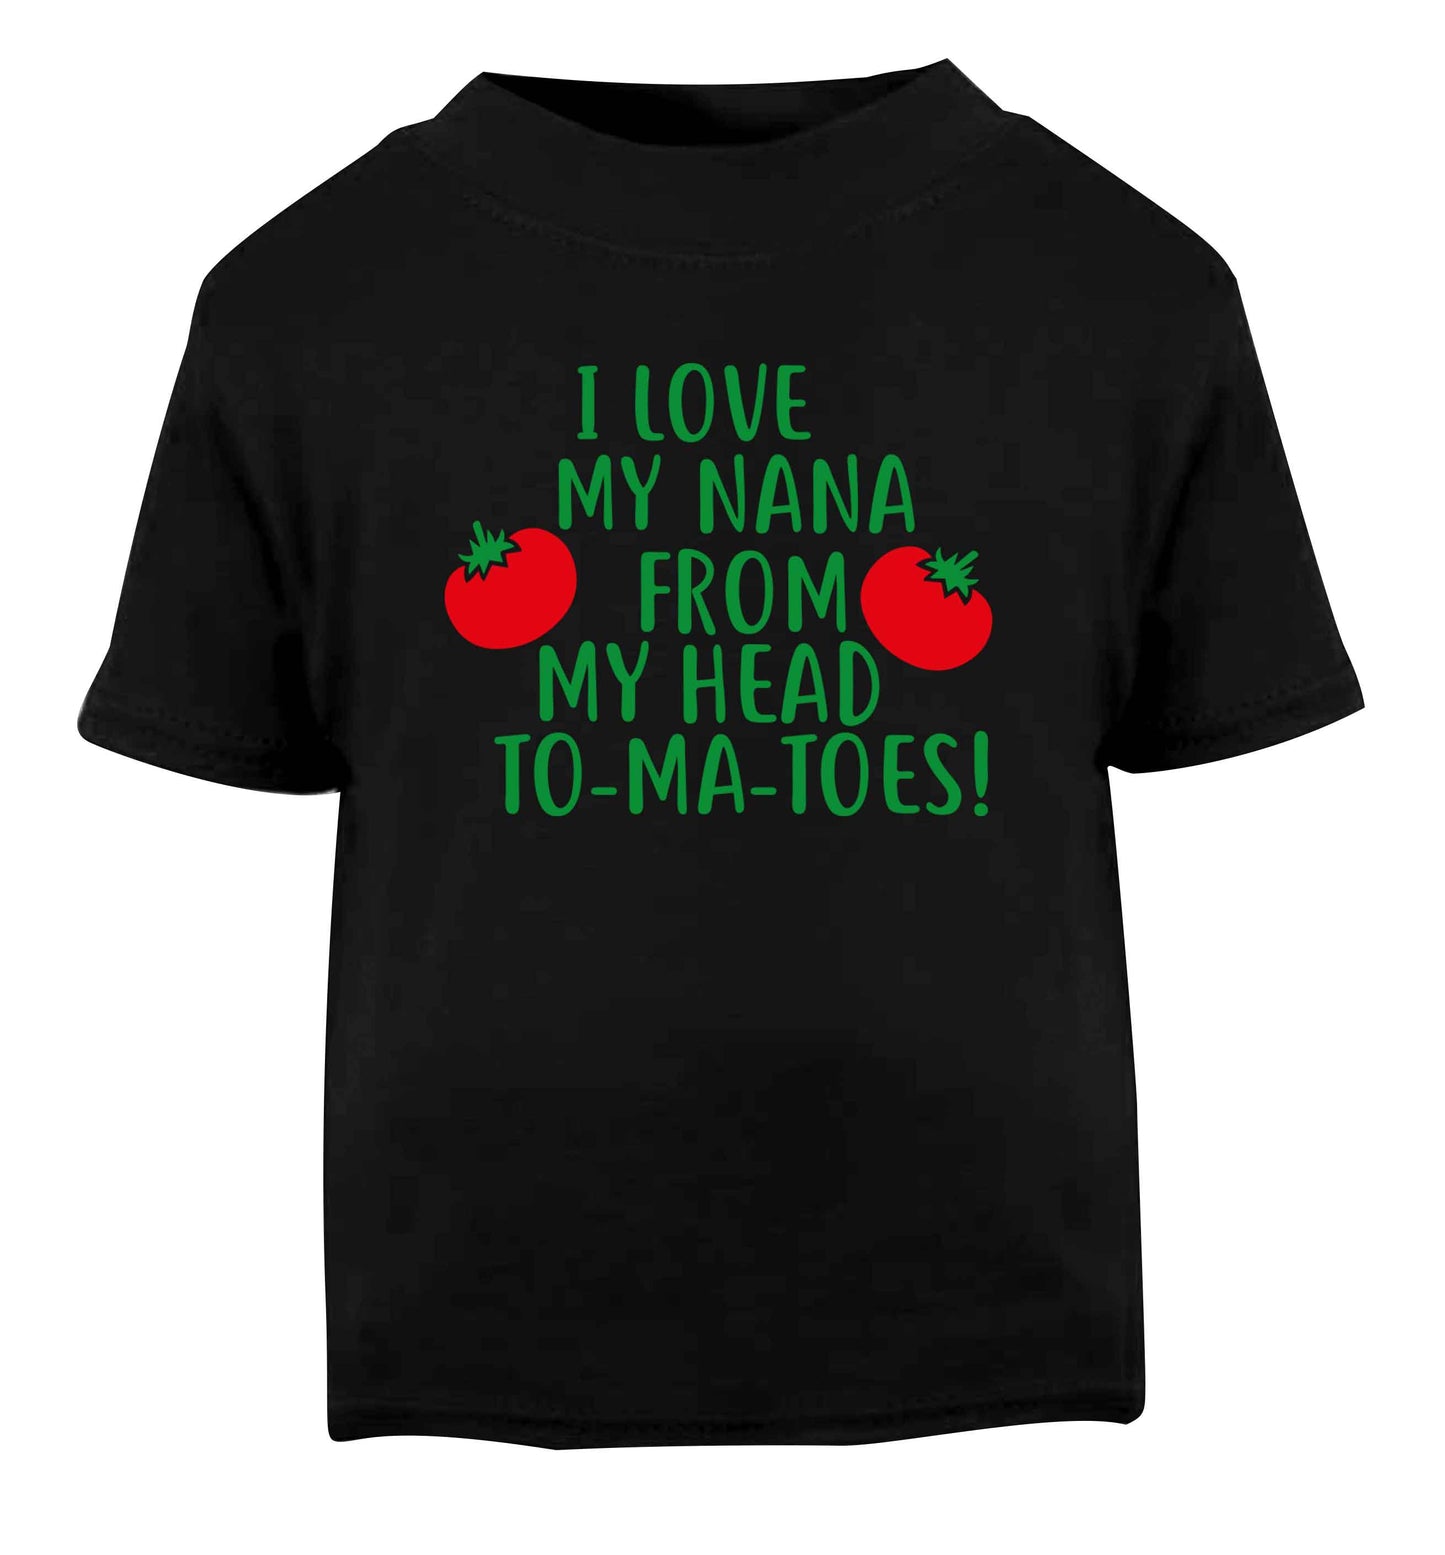 I love my nana from my head to-ma-toes Black Baby Toddler Tshirt 2 years